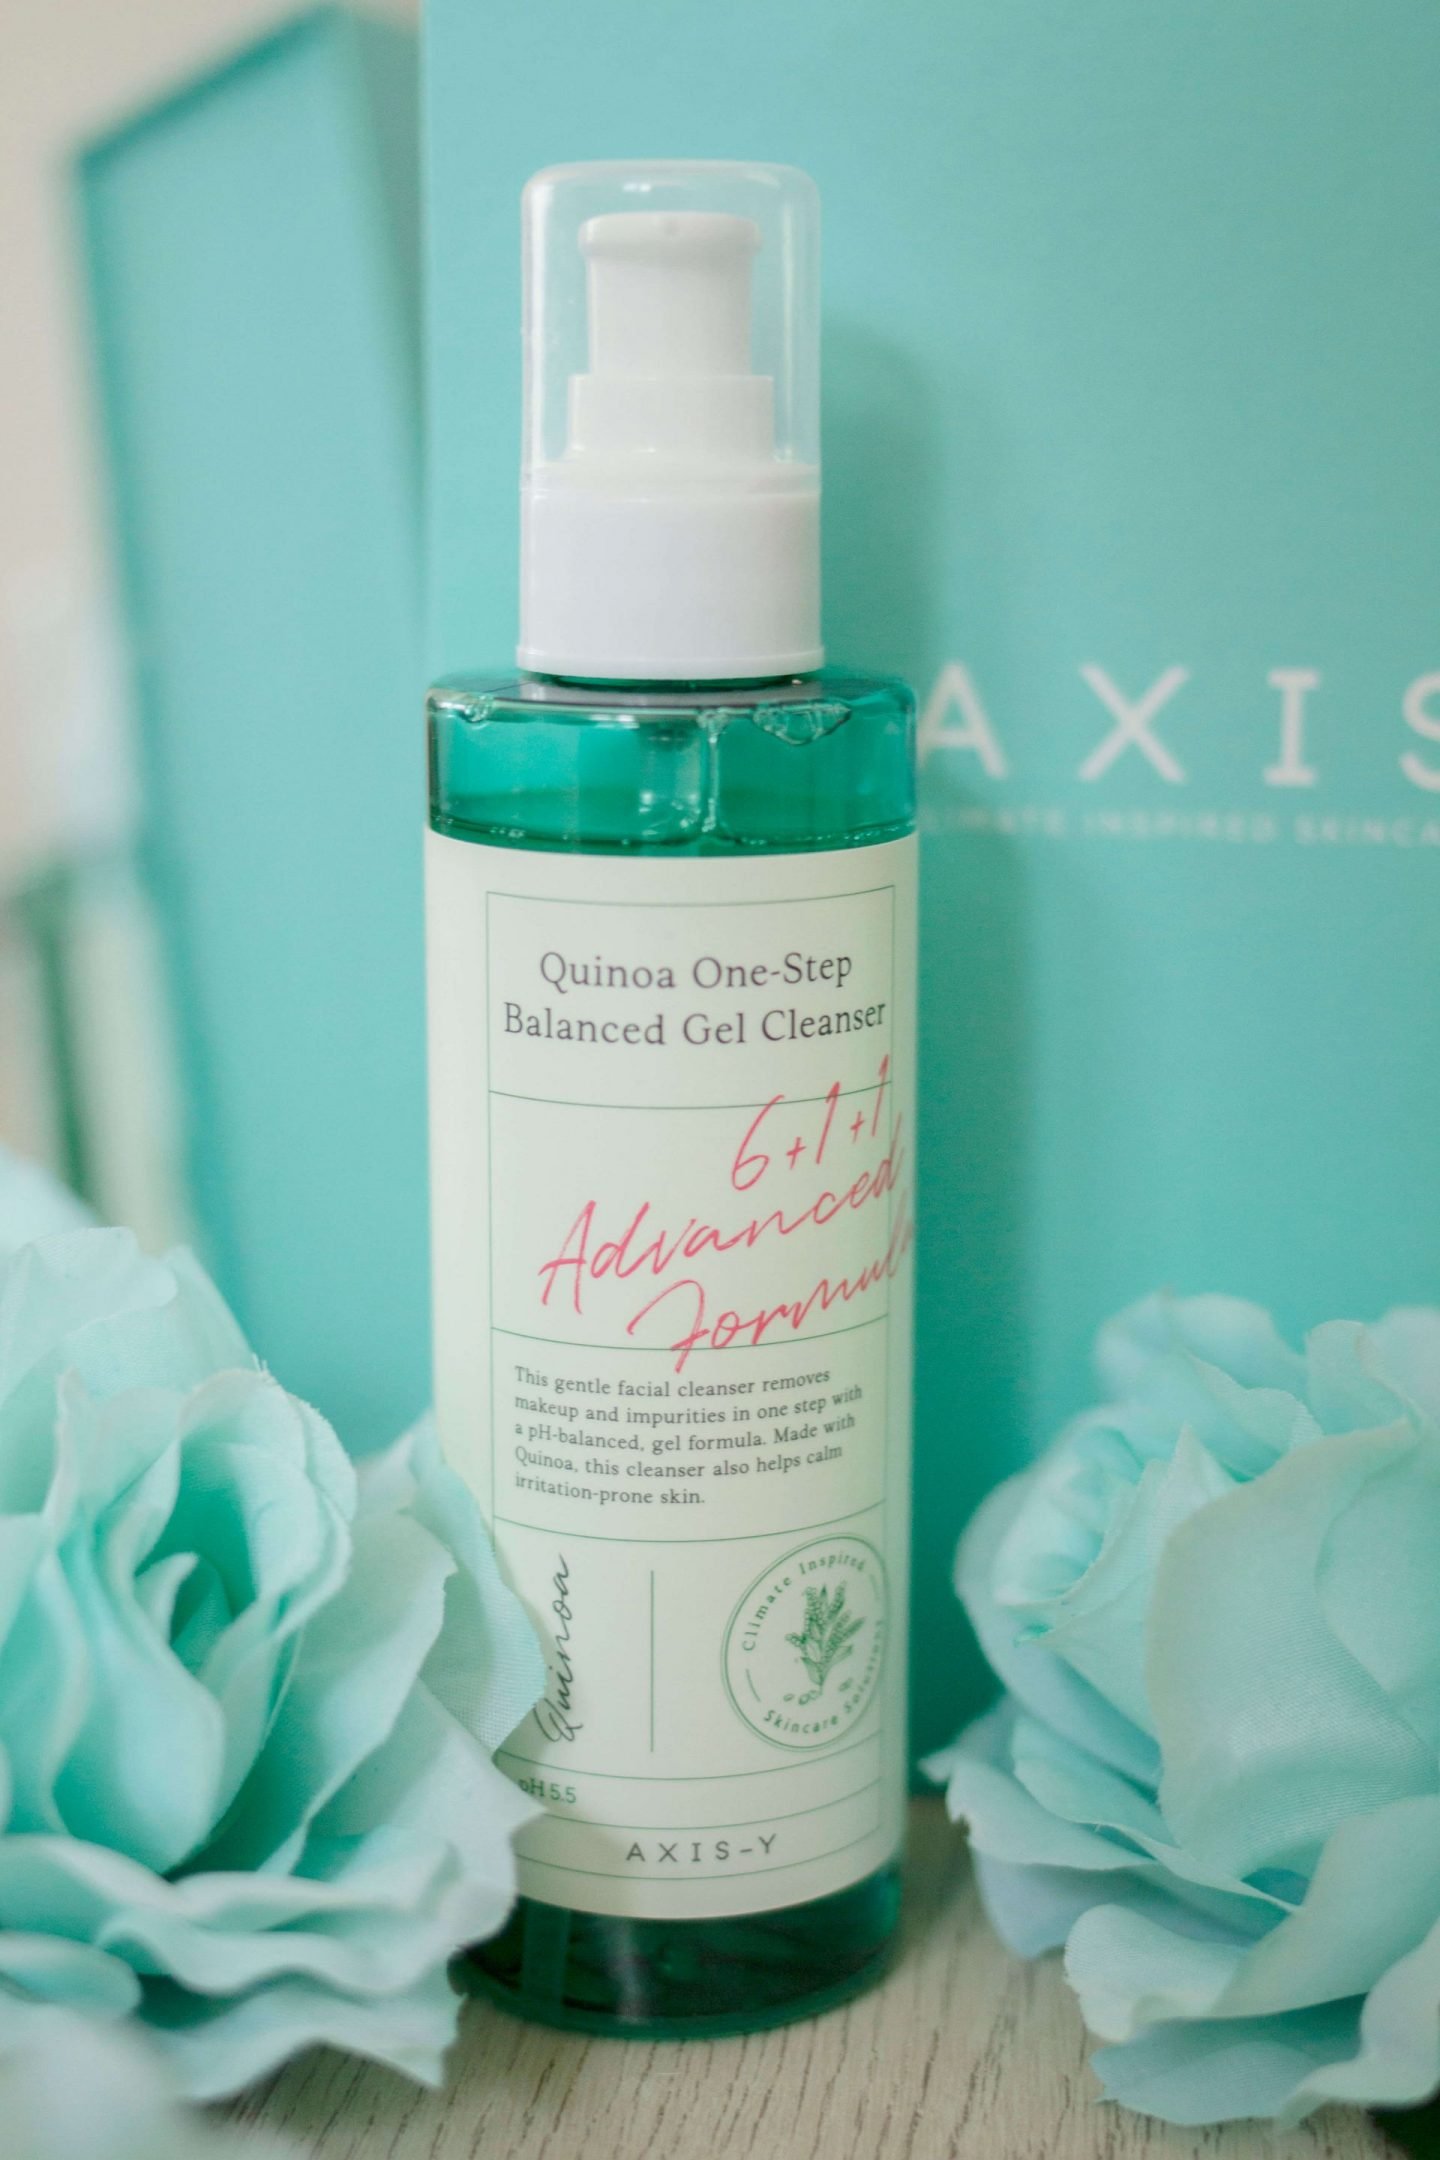 axis-y quinoa one-step balanced gel cleanser review